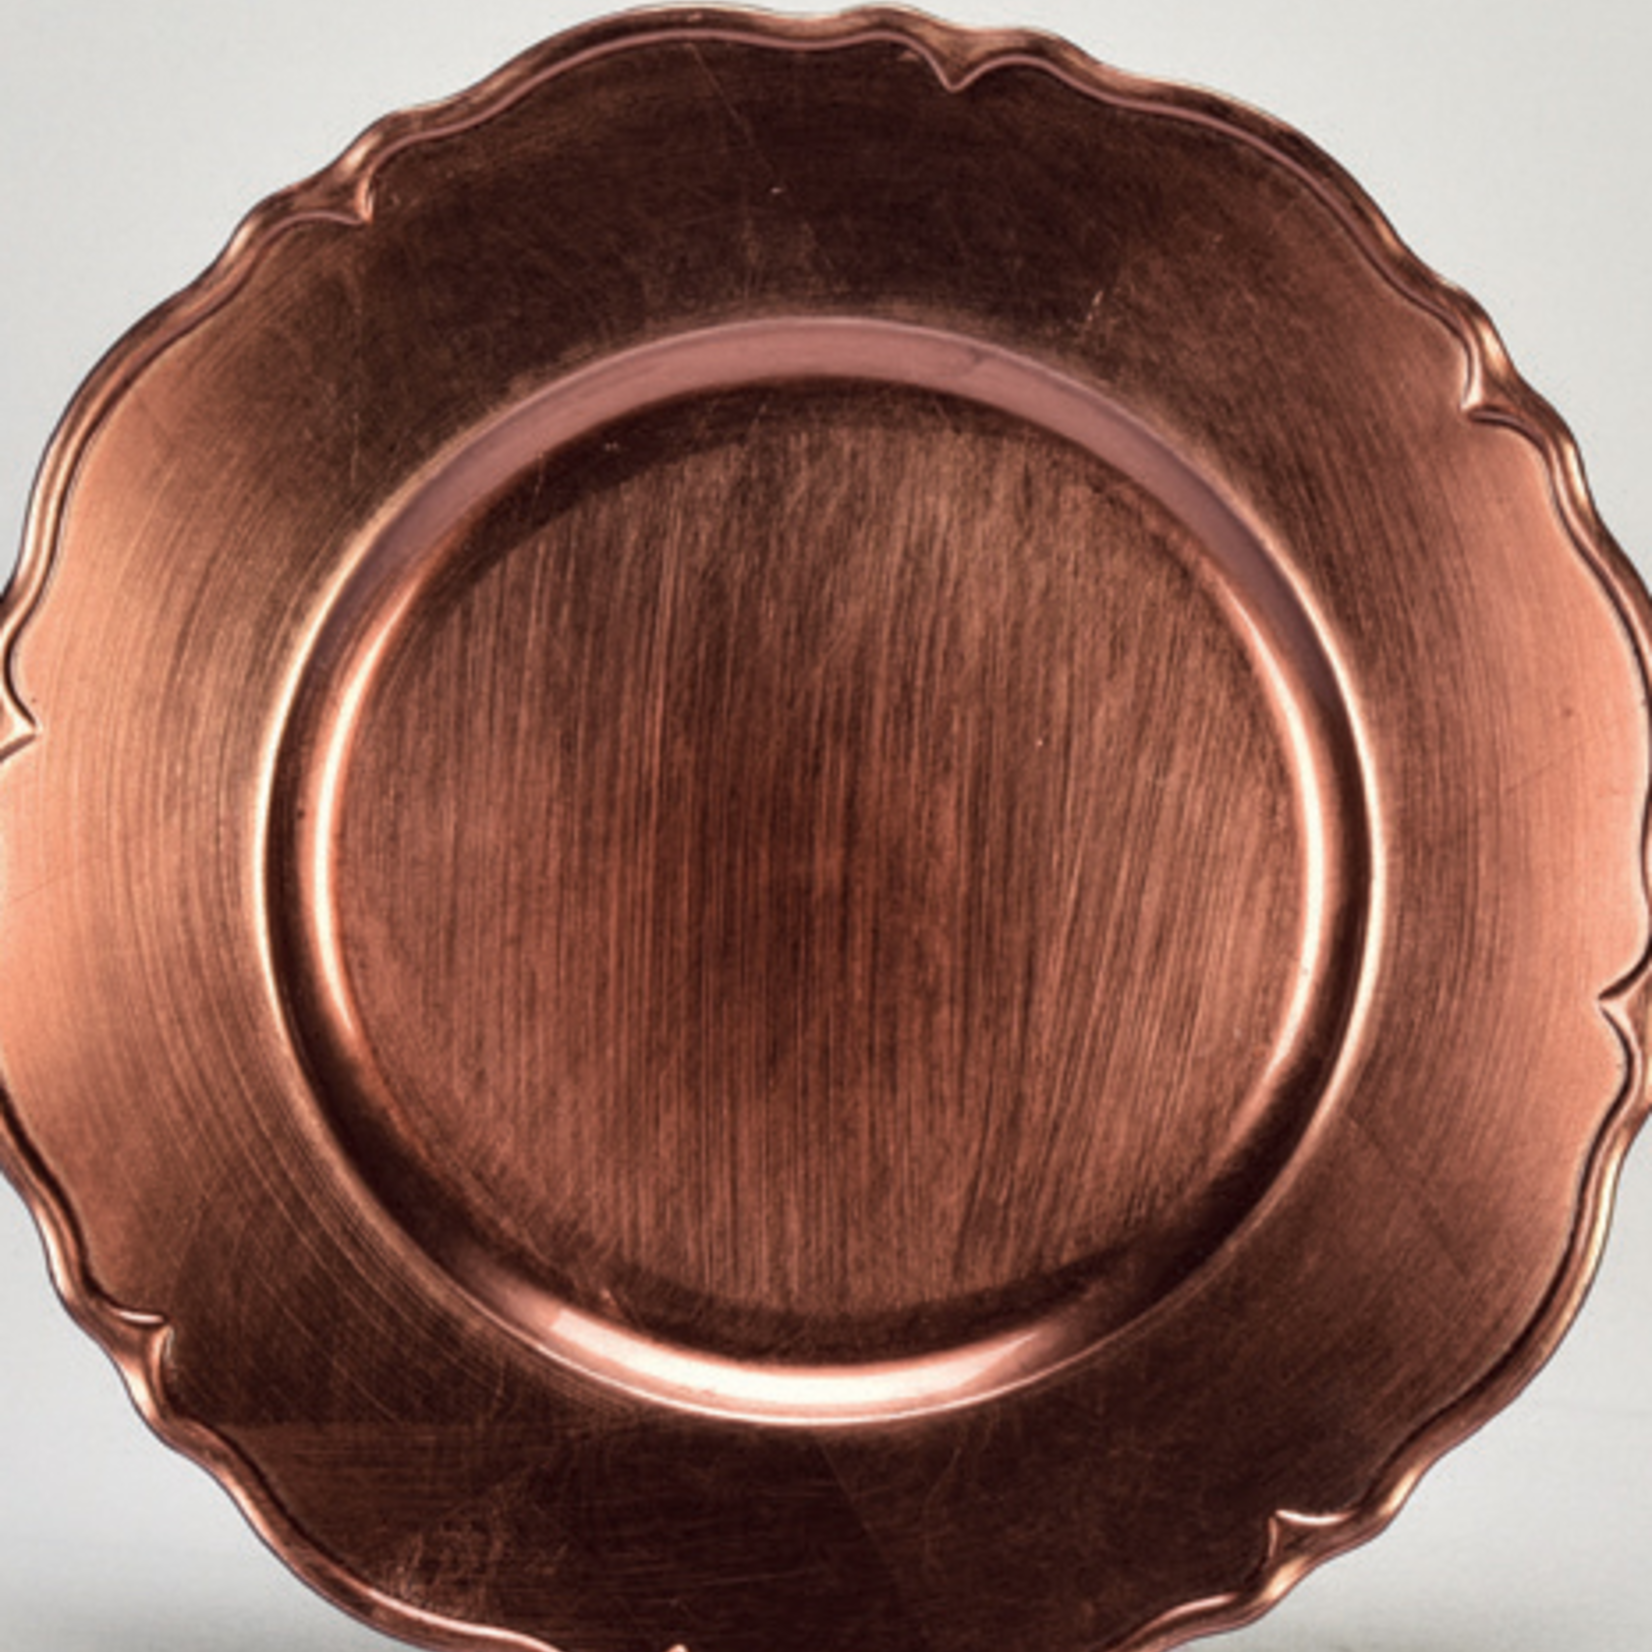 13" ROSE GOLD CHARGER PLATE, REG $2.99